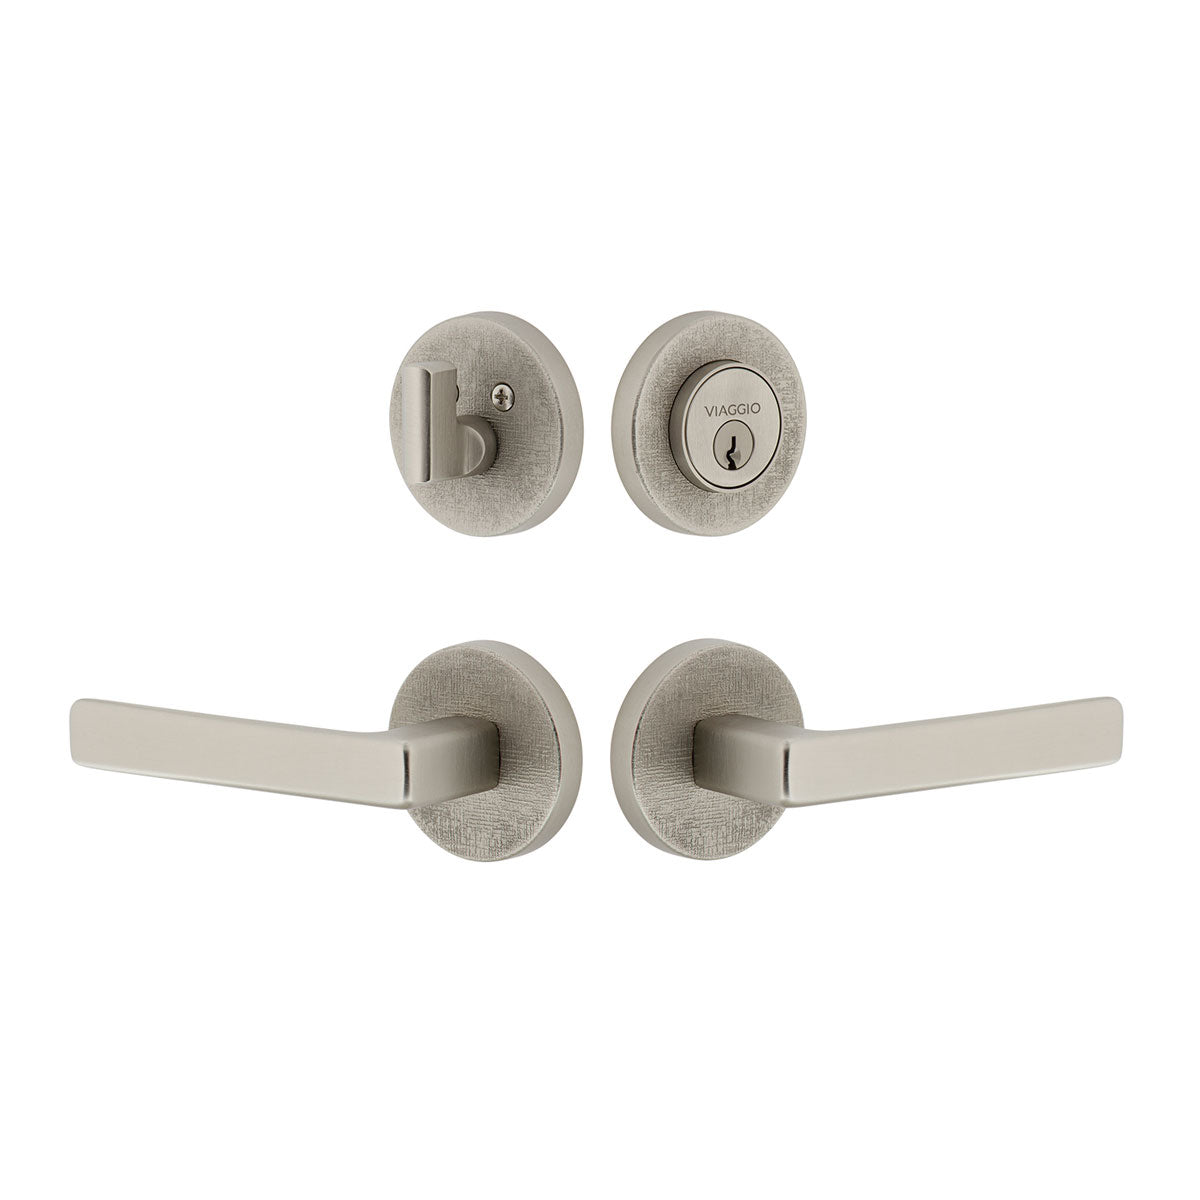 Circolo Linen Rosette Entry Set with Lusso Lever in Satin Nickel